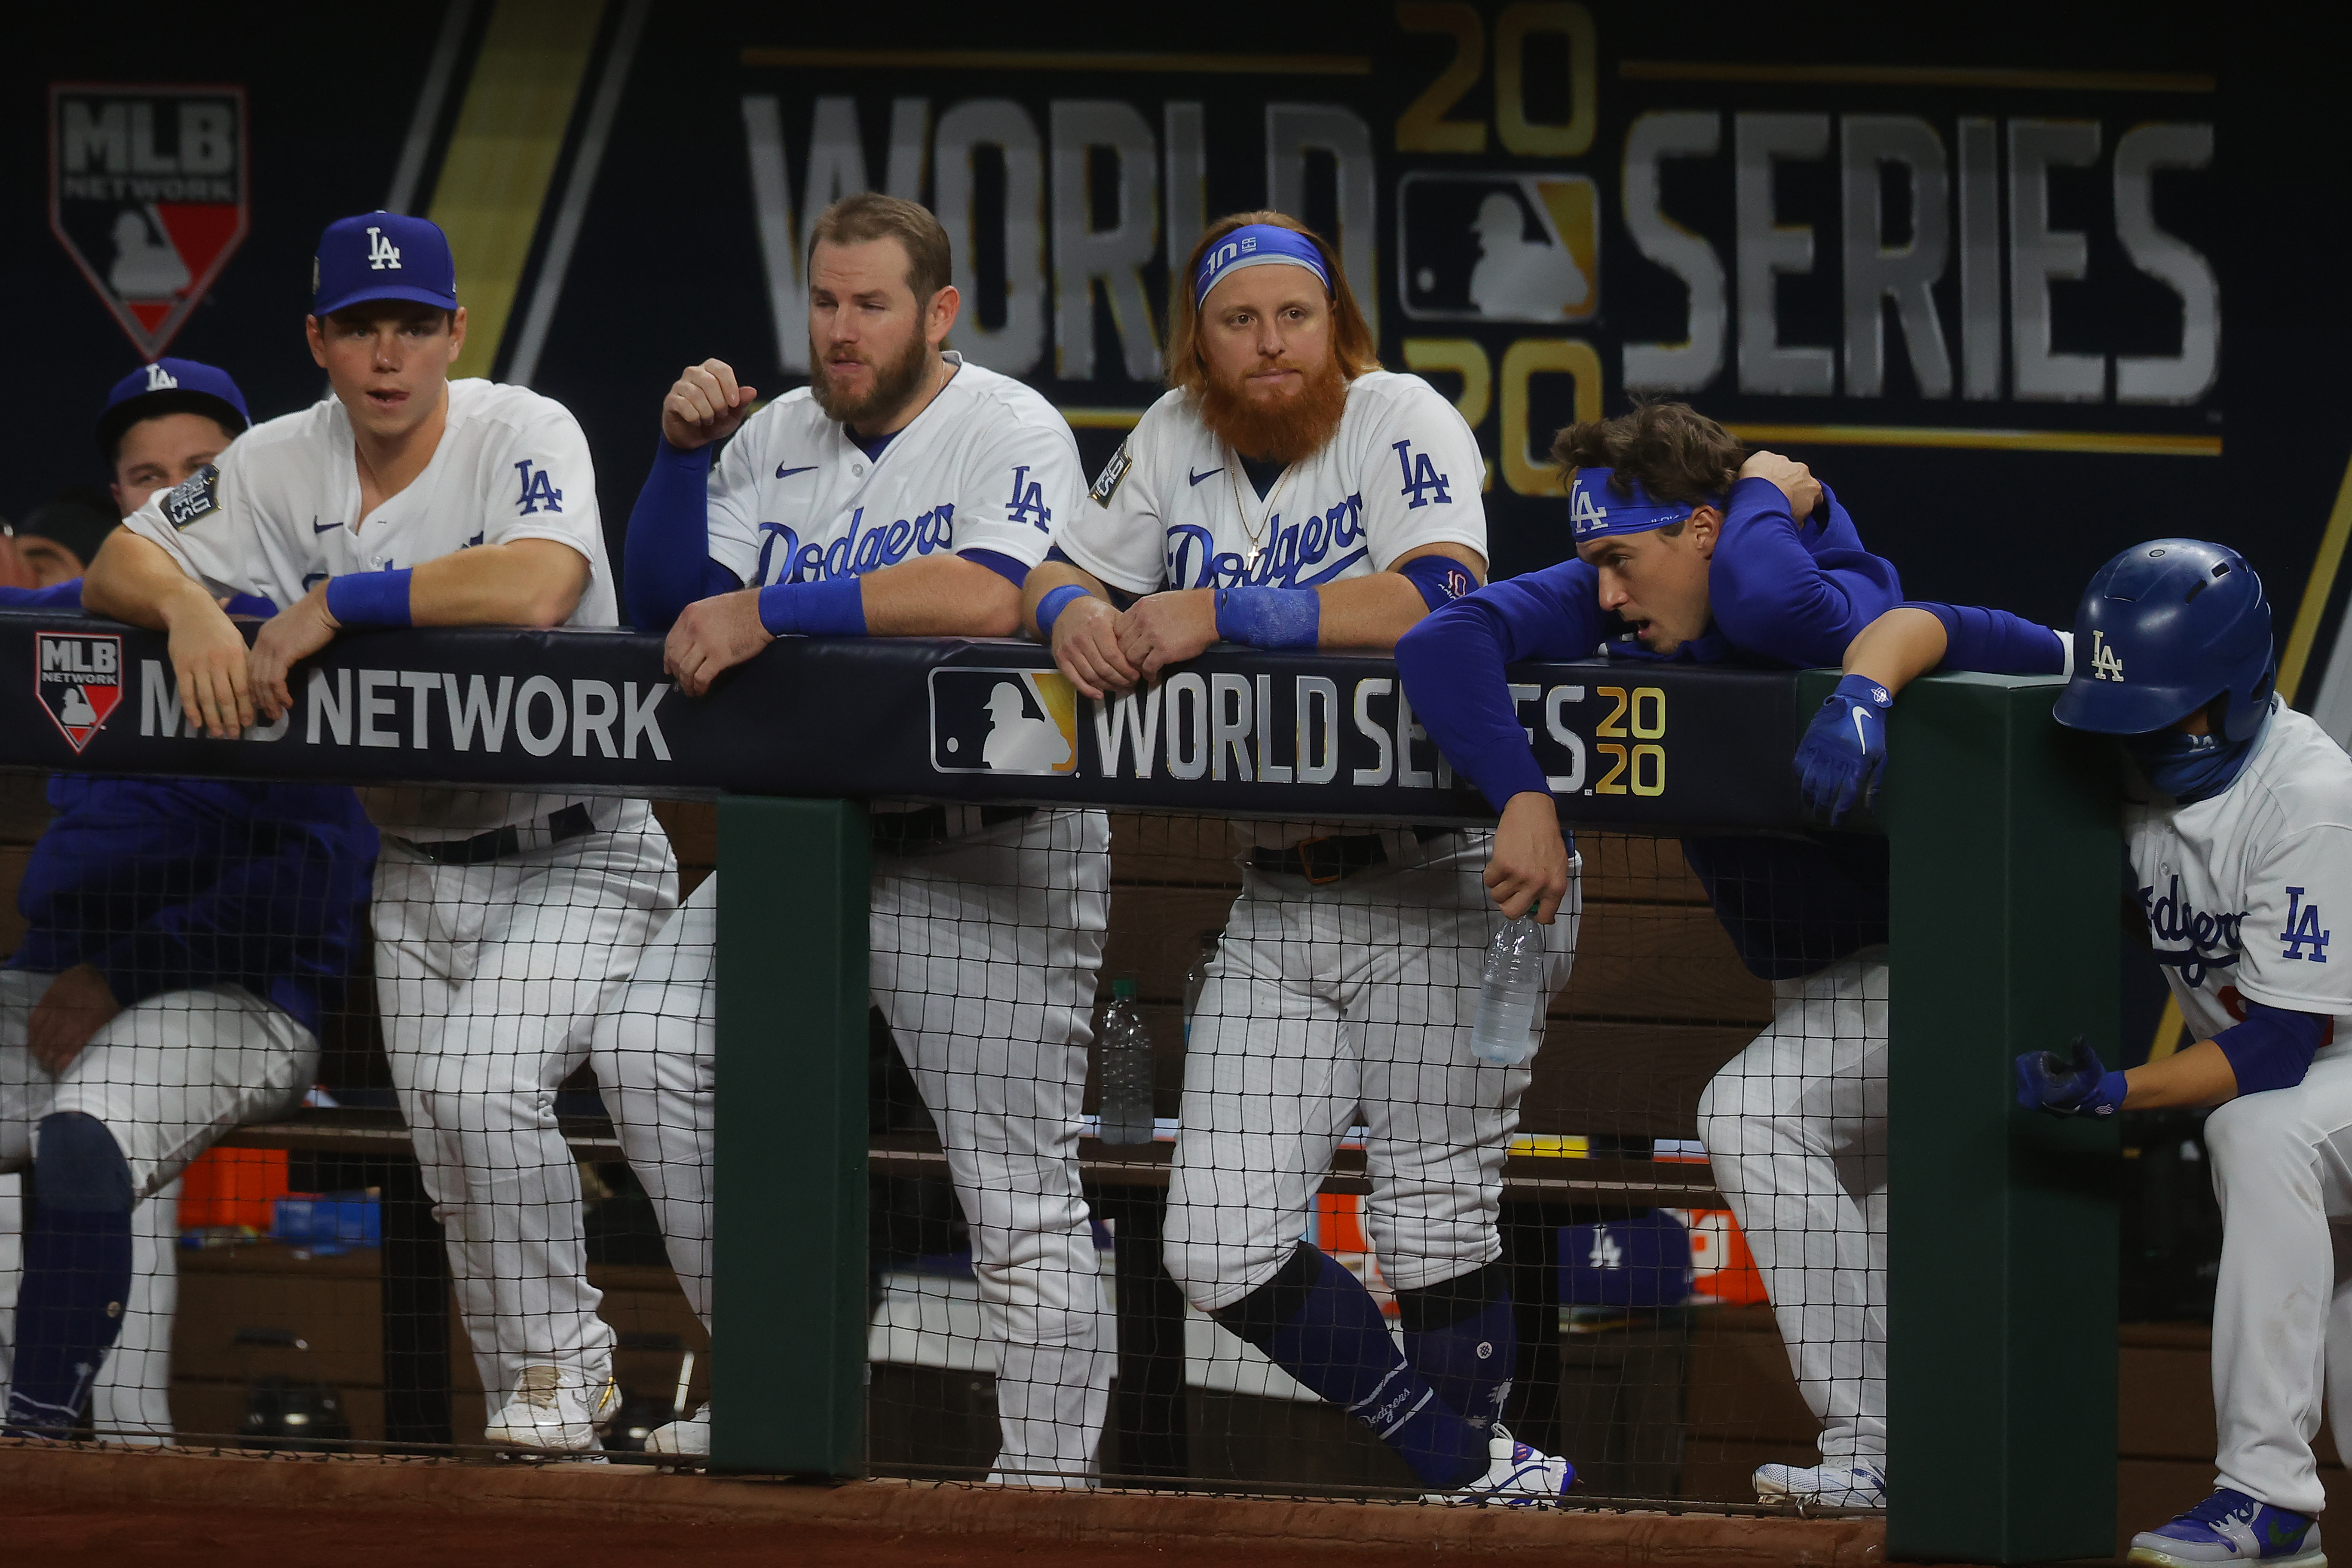 Dodgers' Justin Turner removed from World Series-clinching win due to  positive COVID-19 test